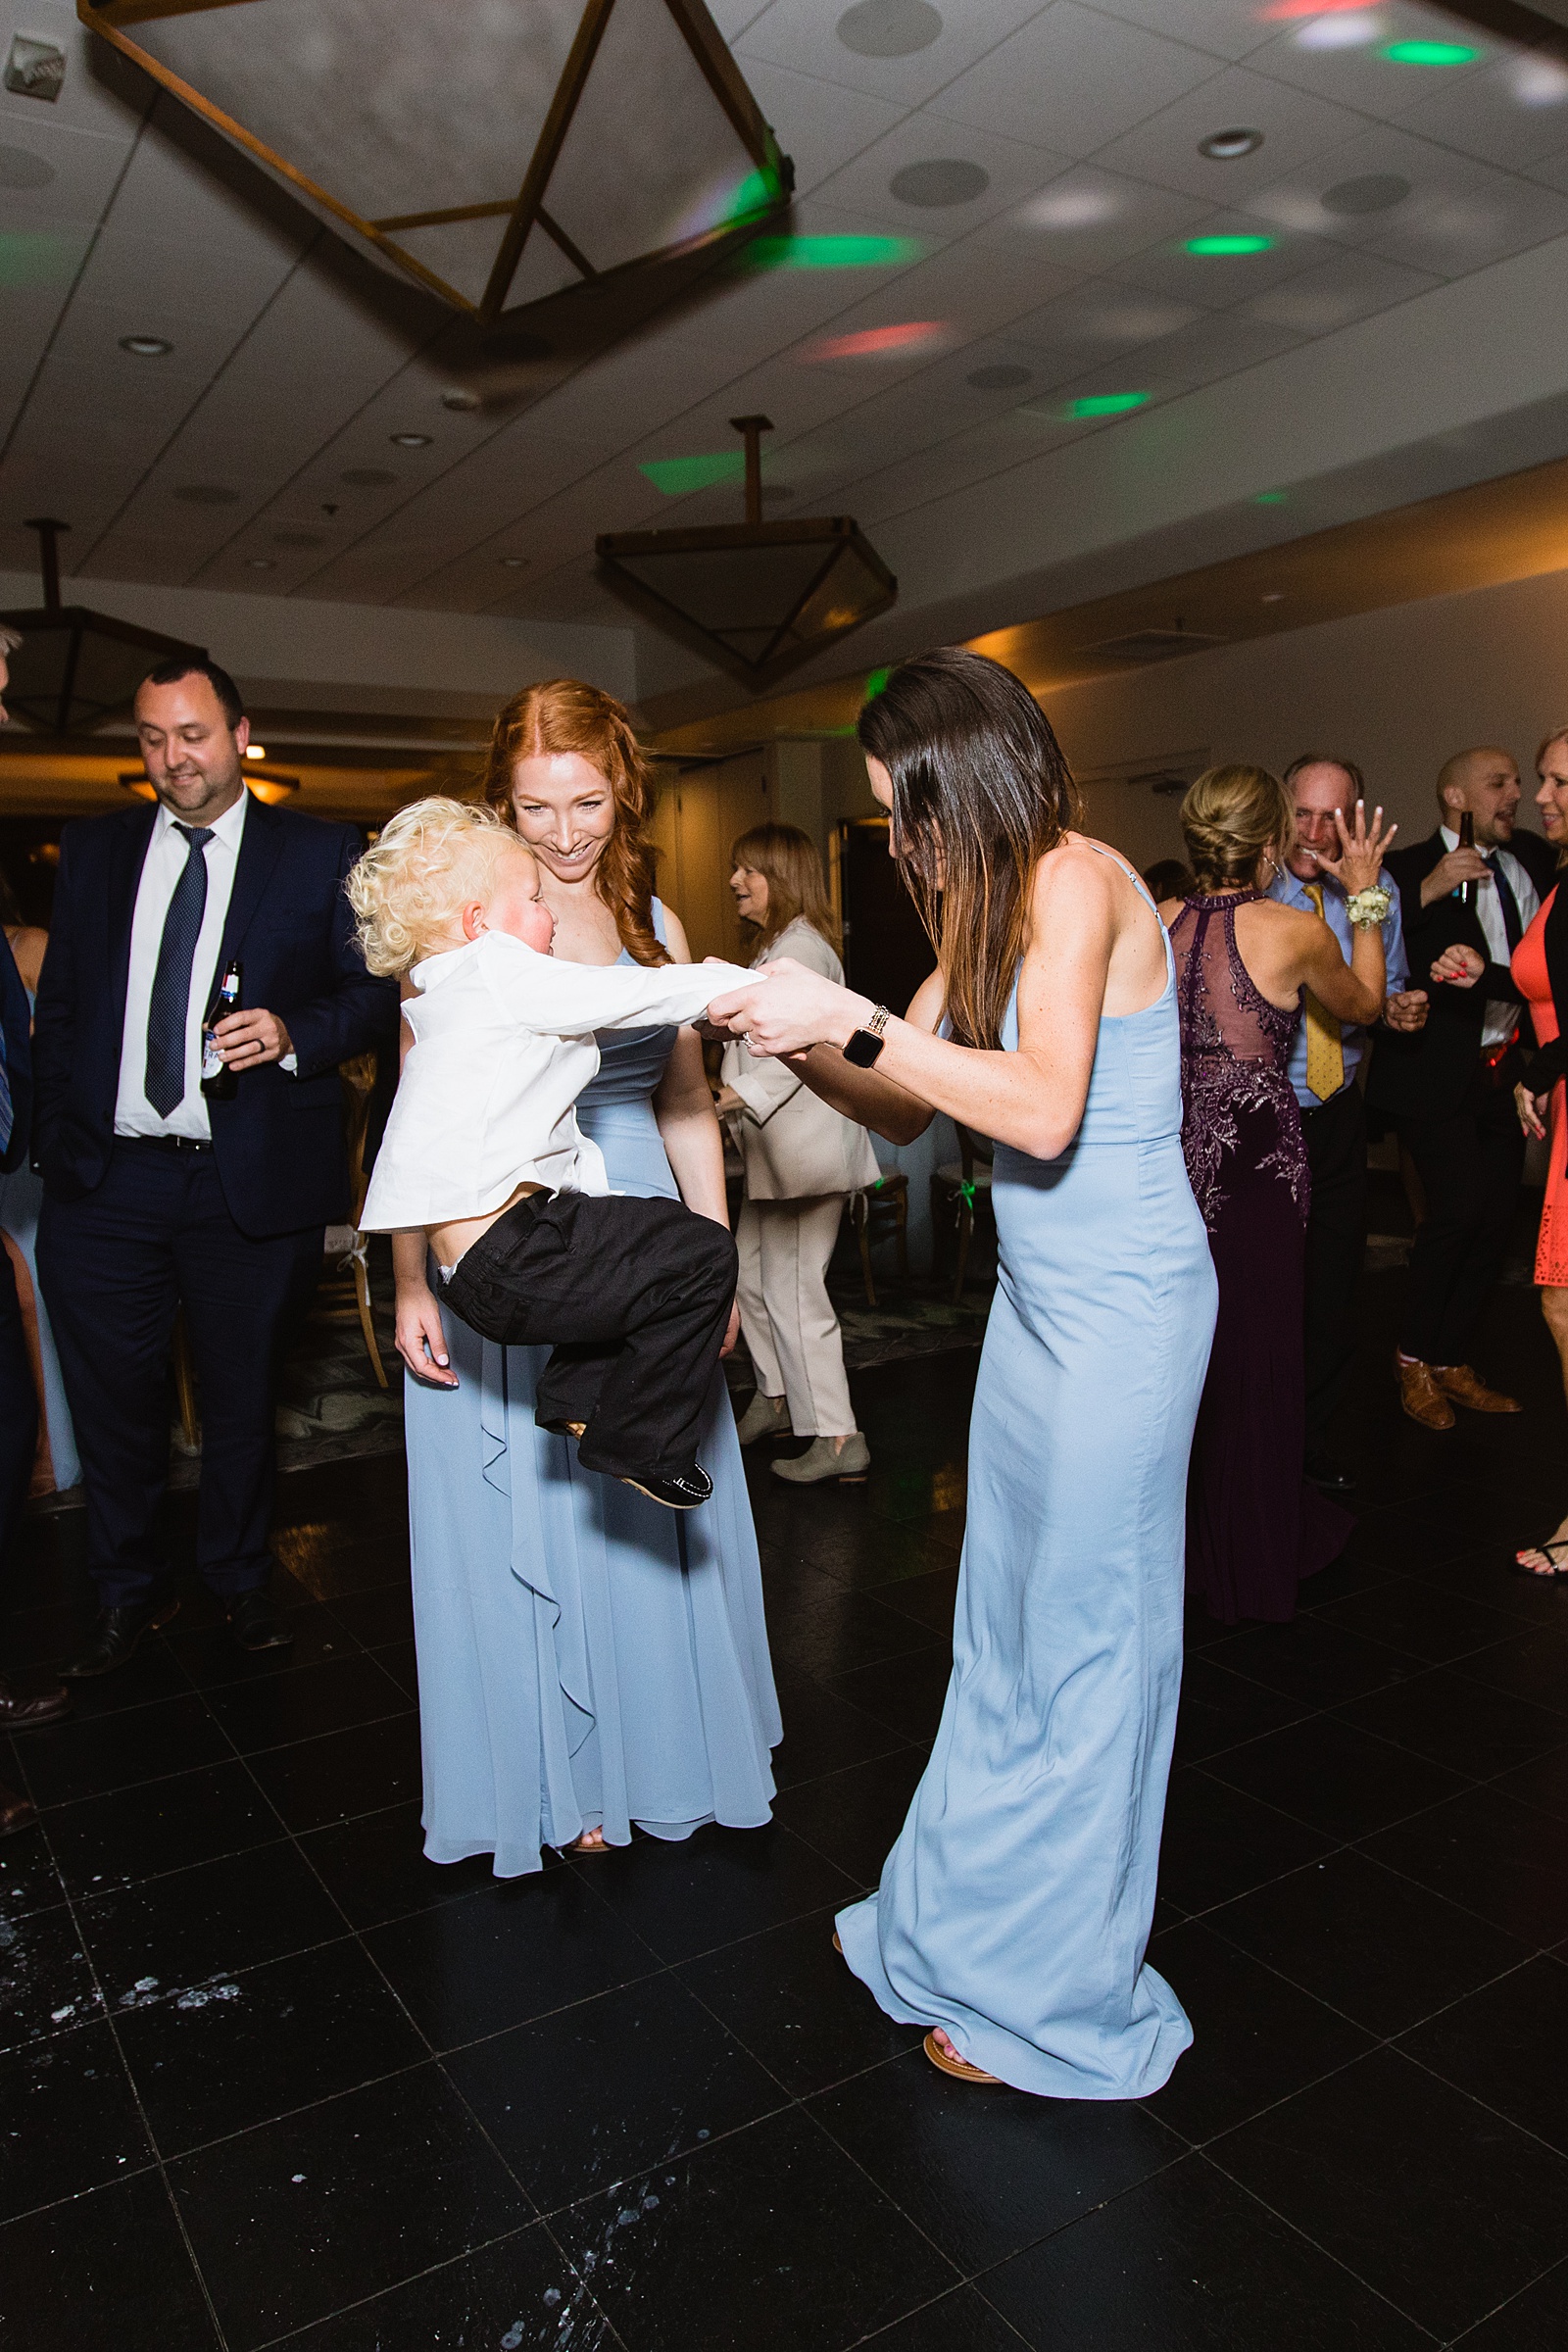 Guests dancing together at Troon North wedding reception by Scottsdale wedding photographer PMA Photography